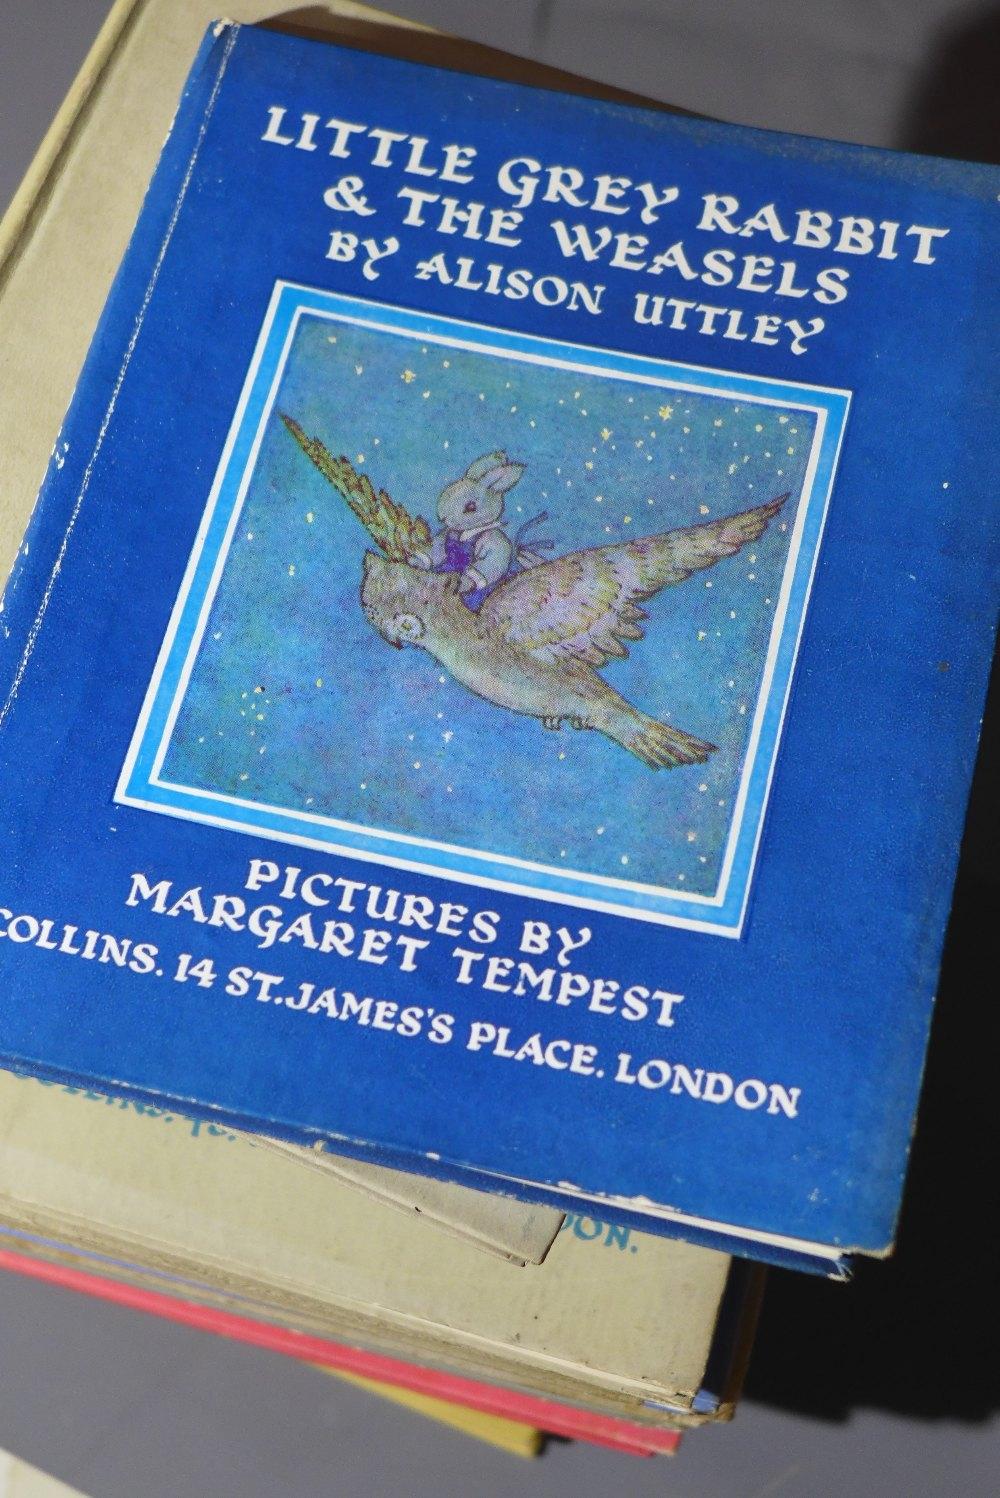 A collection of twenty-one children's books by Alison Uttley, to include Little Grey Rabbit & The - Image 2 of 6